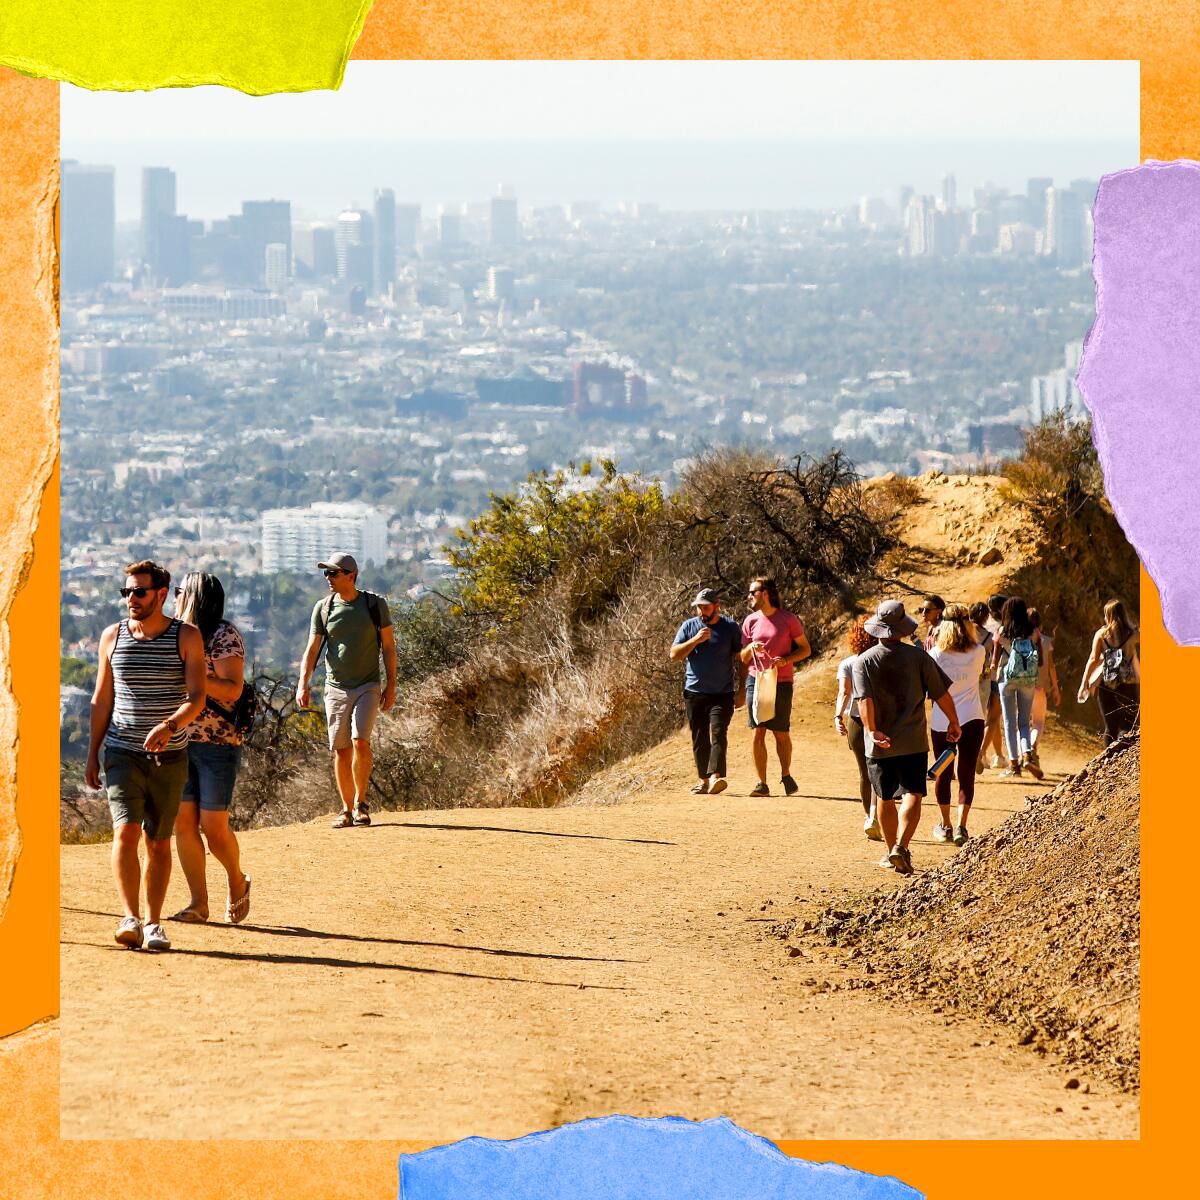 People walk on a dirt hiking trail in the hills.